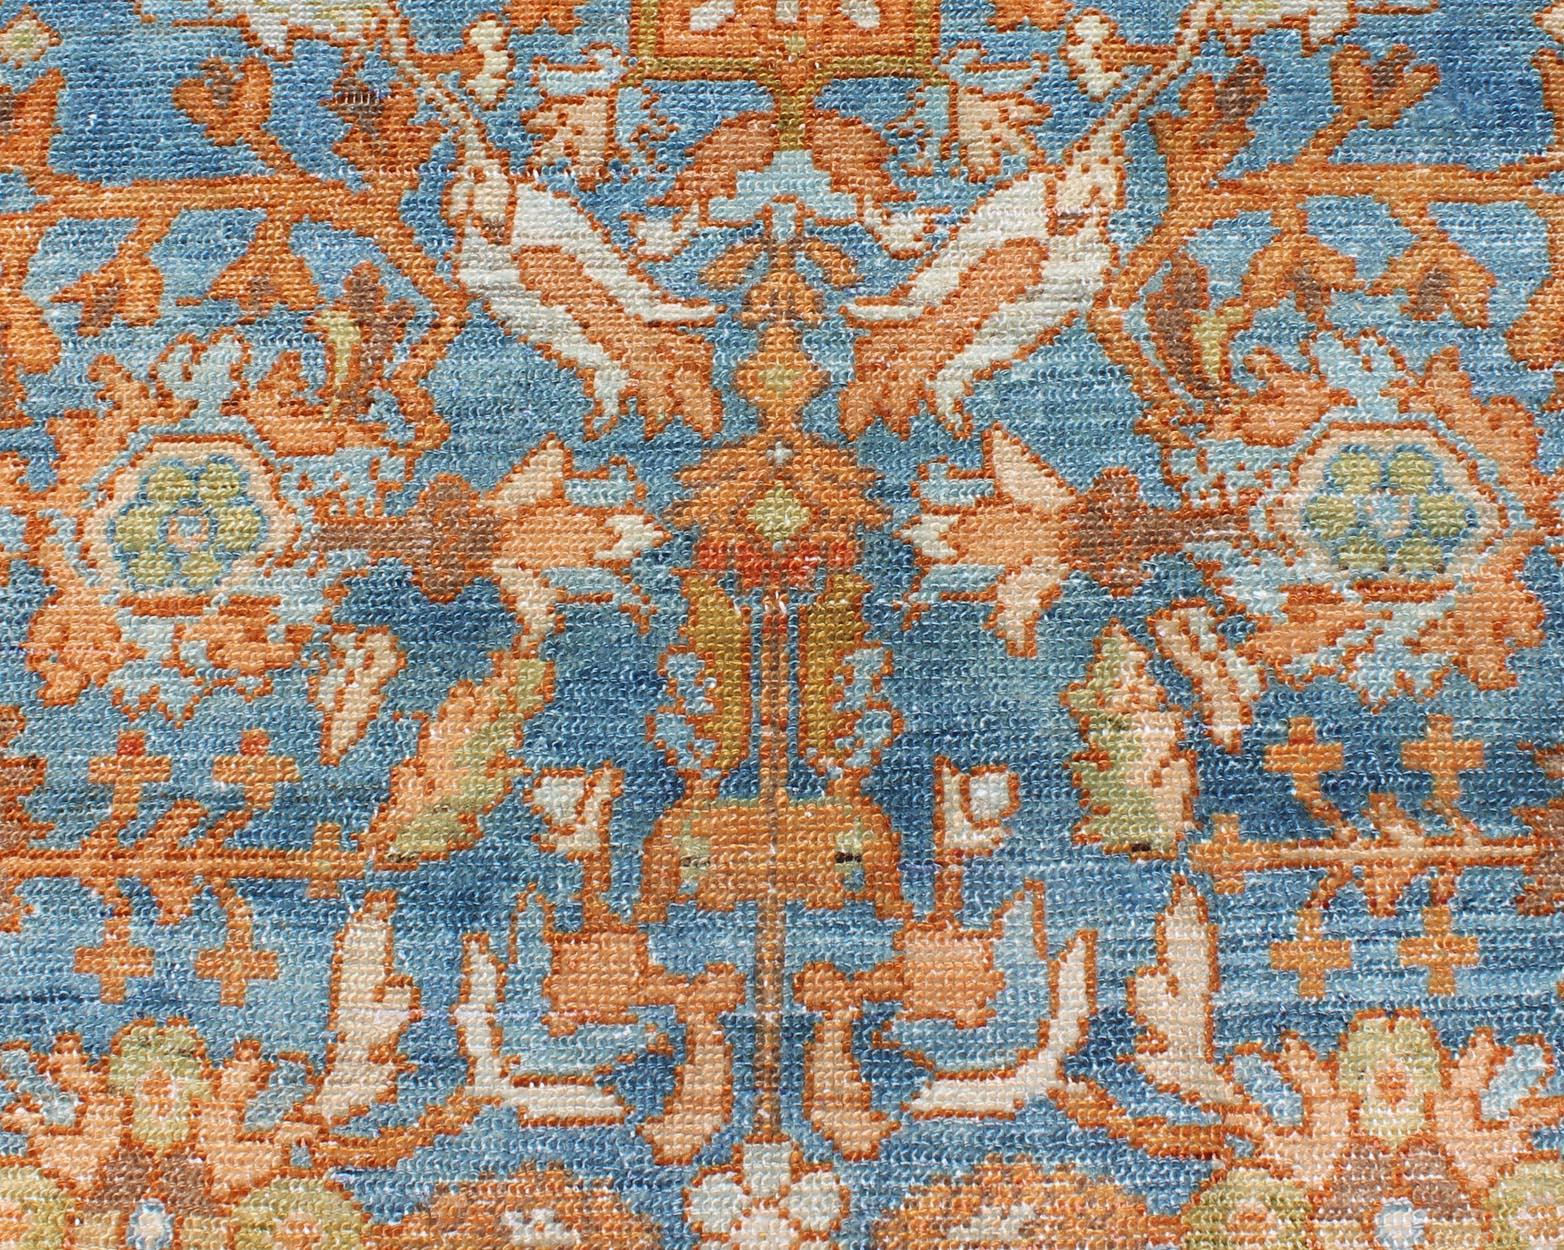 Vibrant Antique Persian Malayer Rug in Shades of Rust, Orange, and Blue For Sale 1